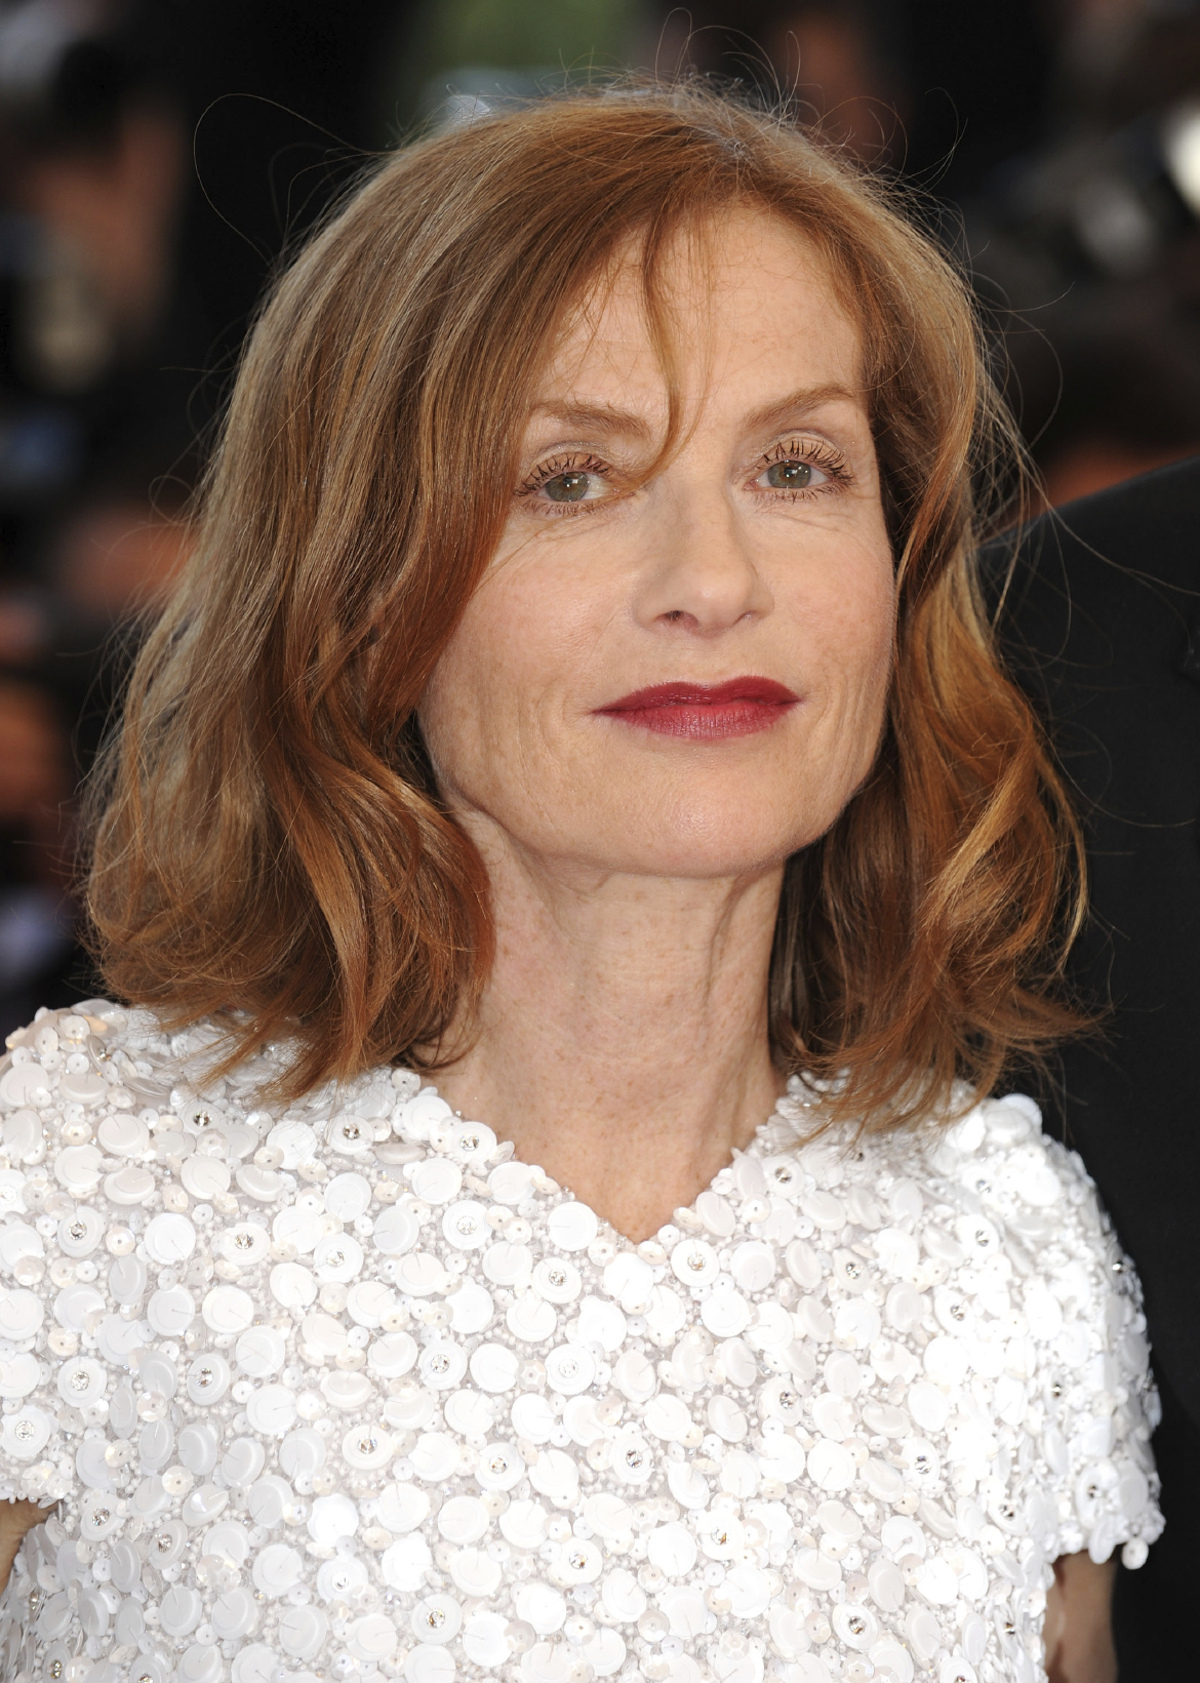 ISABELLE HUPPERT at Westminster Hotel in Paris 01/30/2017 